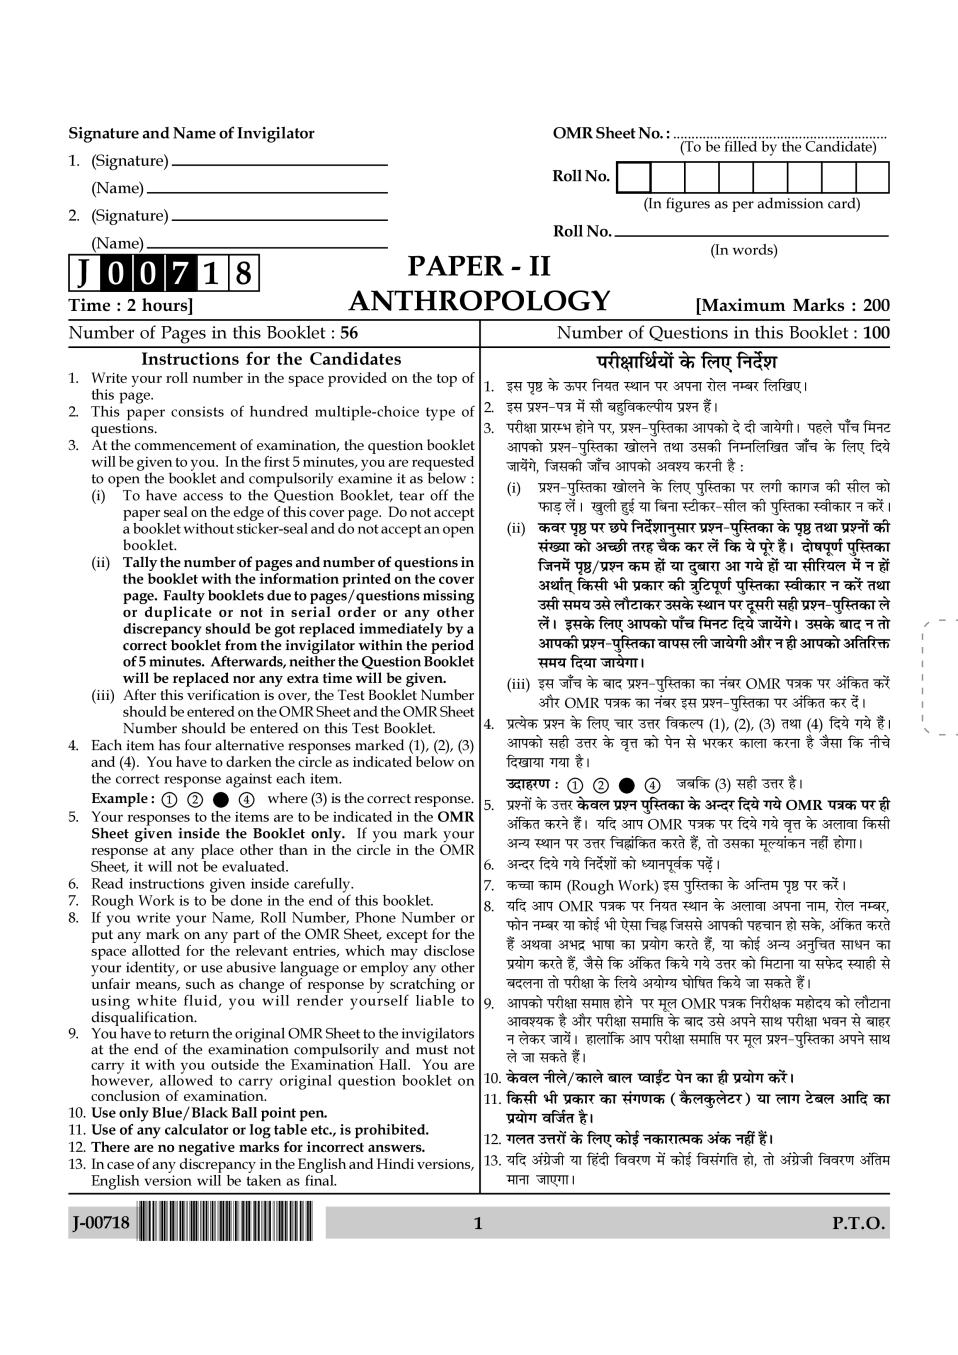 UGC NET Anthropology Question Paper 2018 - Page 1